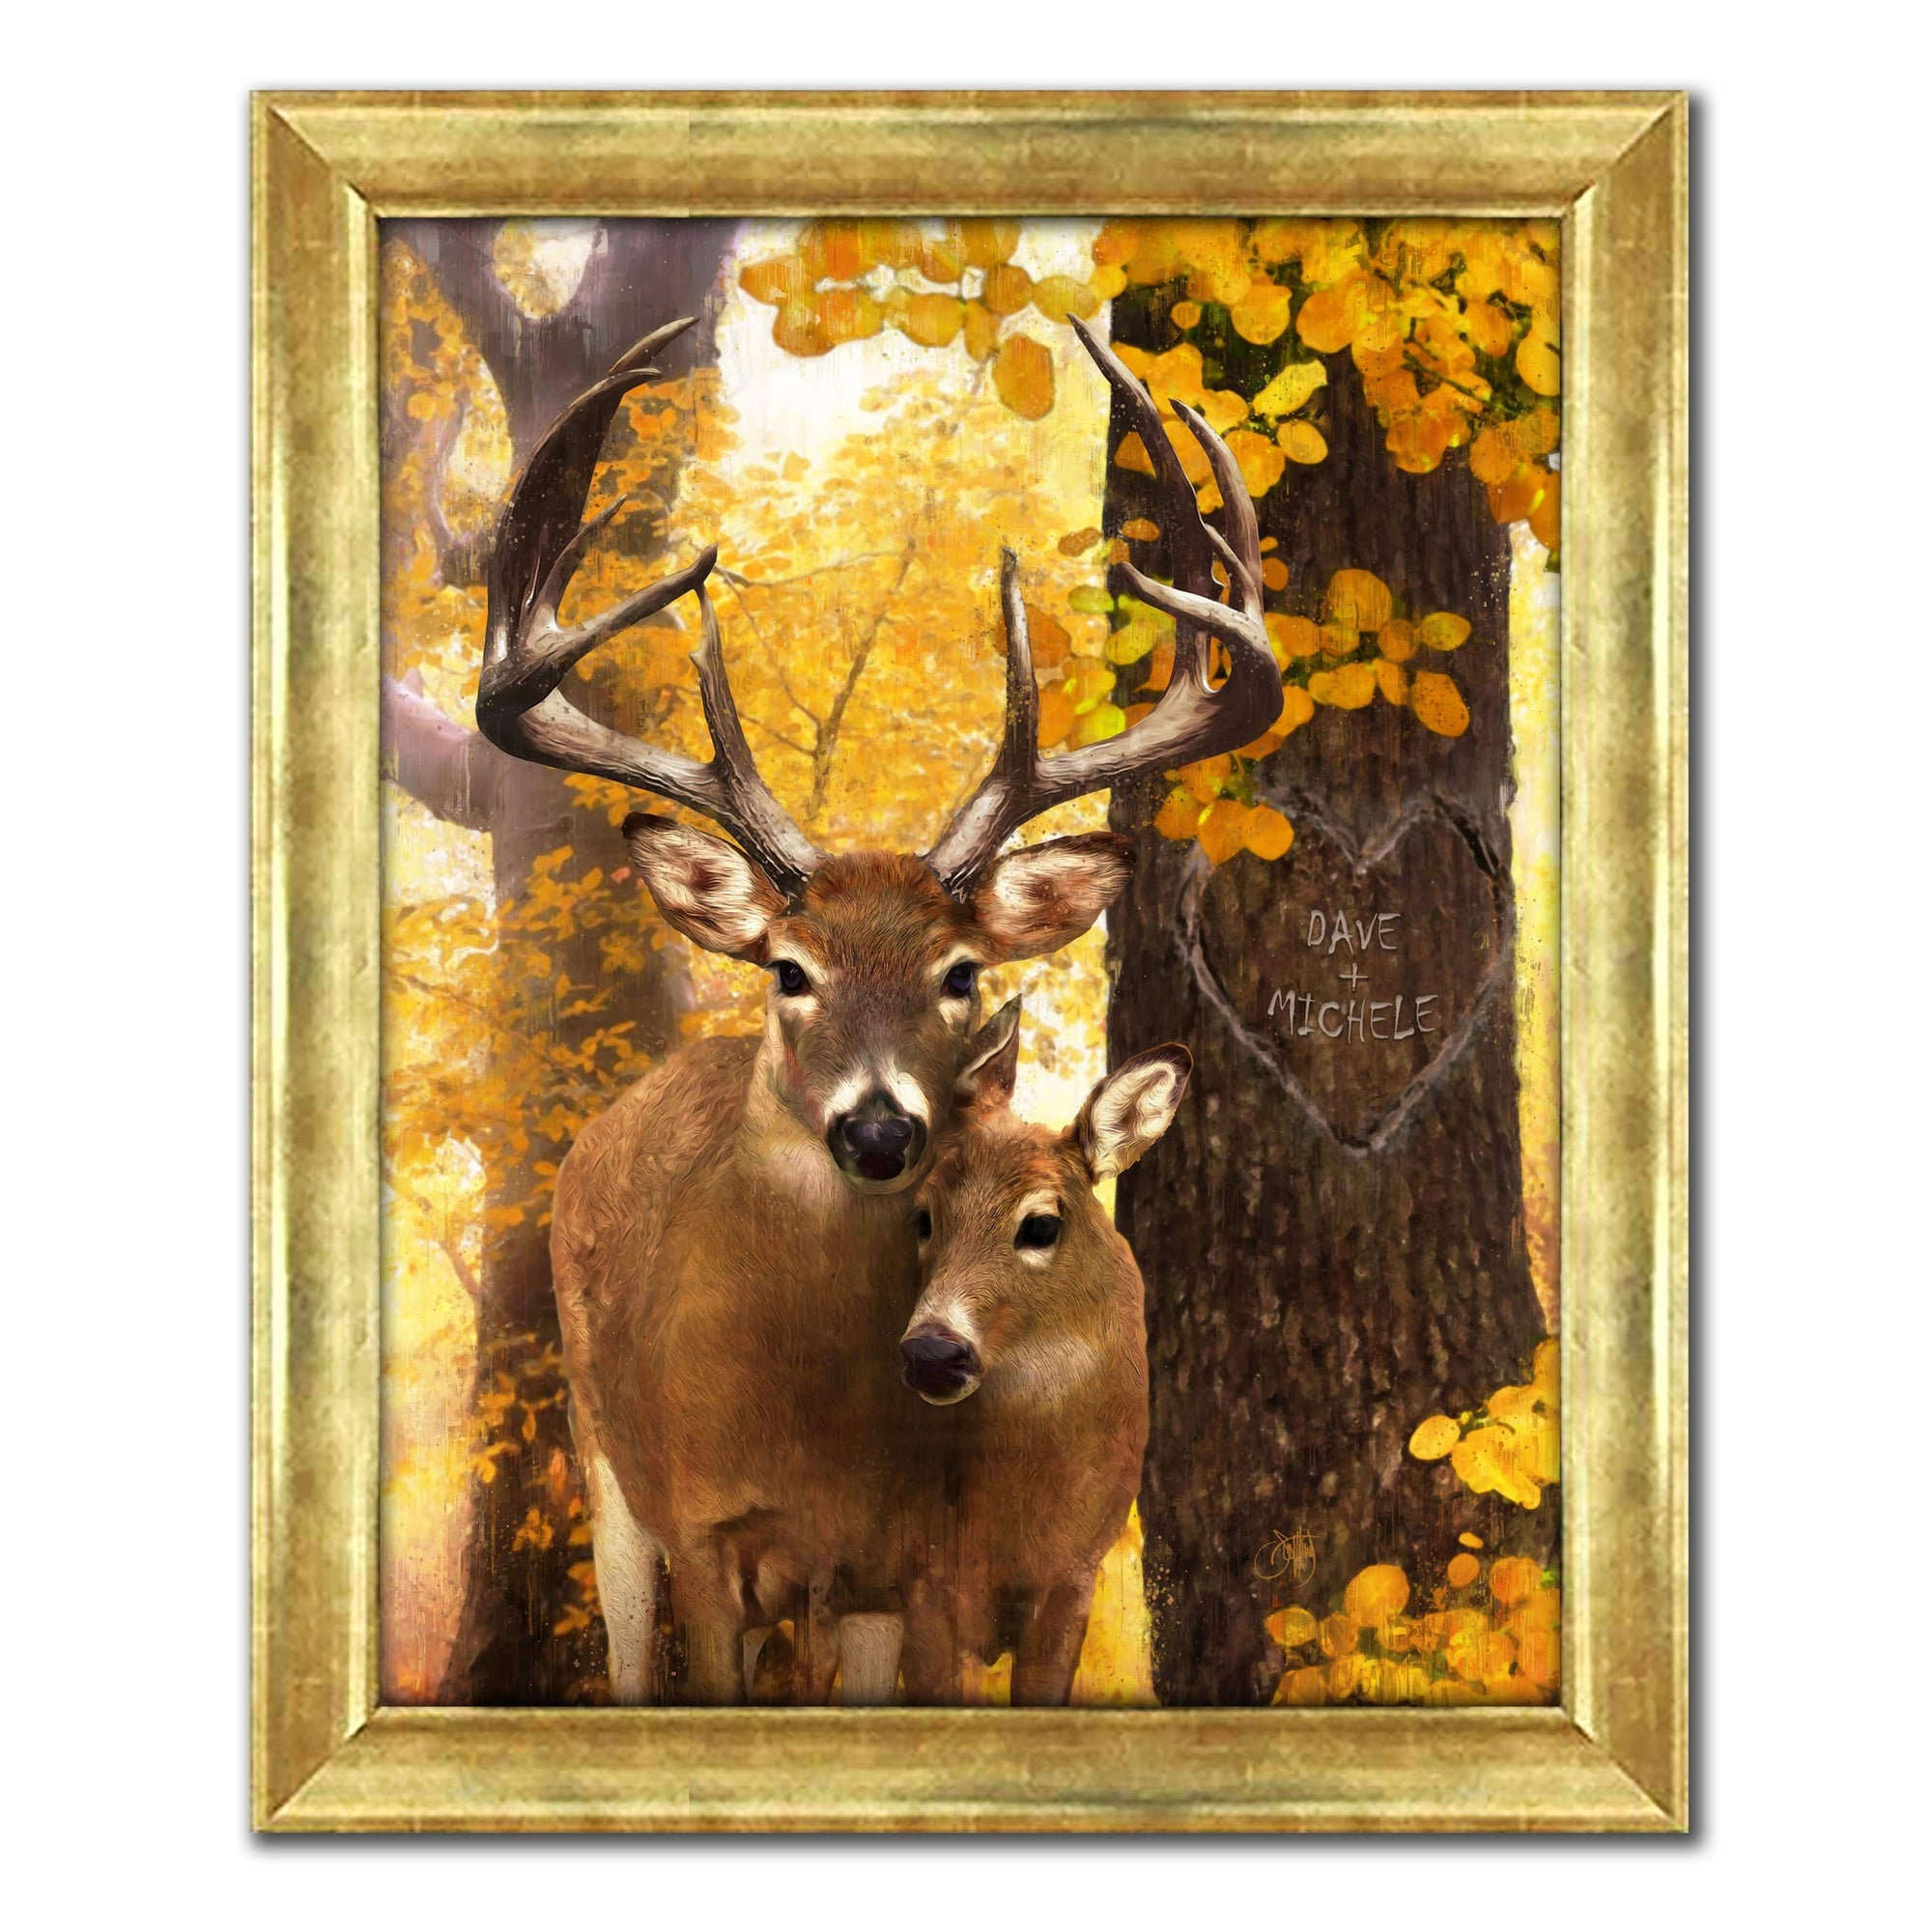 Whitetail Deer framed canvas art with your personalized names in the artwork